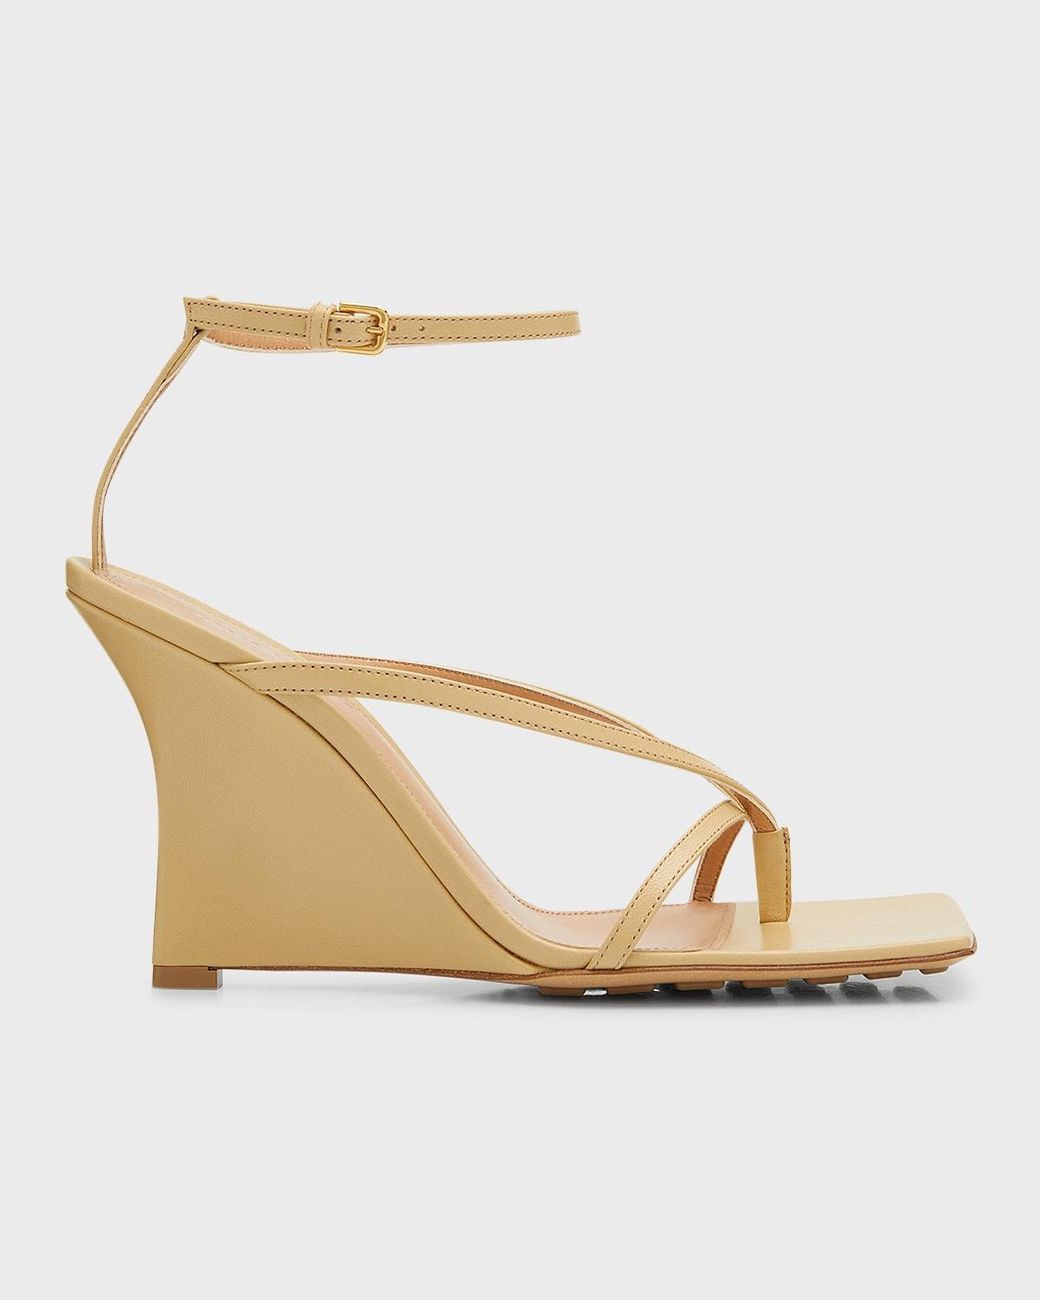 Mango strappy wedge in gold | ASOS